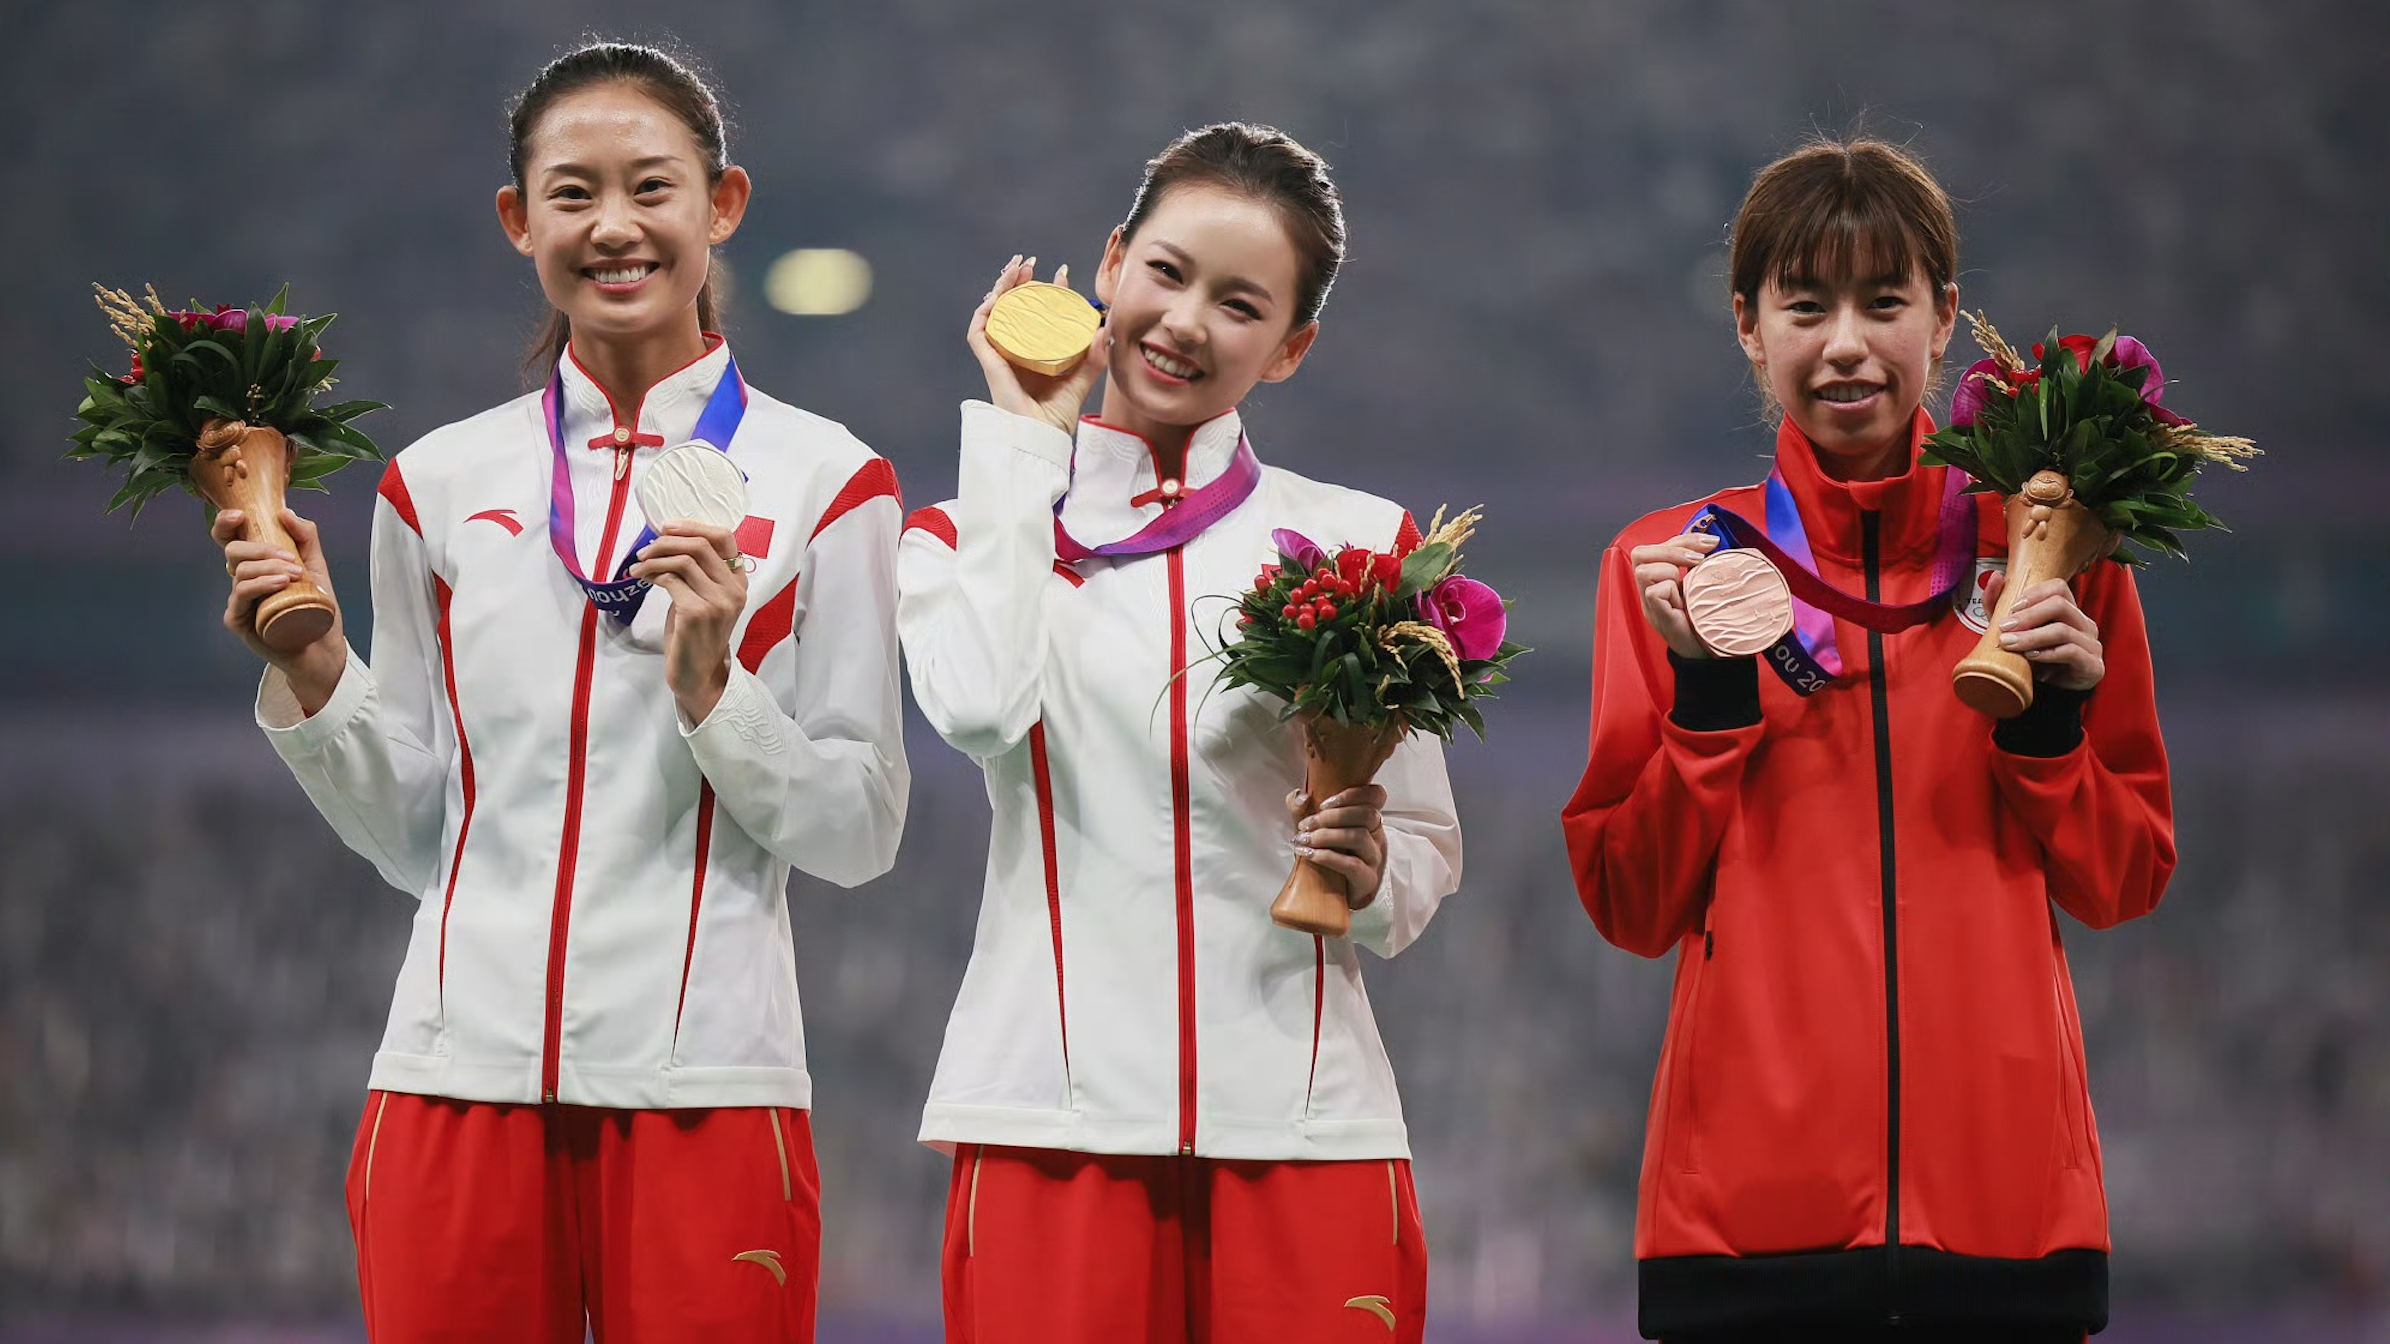 Chinese beauty brands stole the spotlight at this year’s Asian Games, leveraging athlete endorsements, partnerships, and special makeup services. Image: Mao Geping Weibo